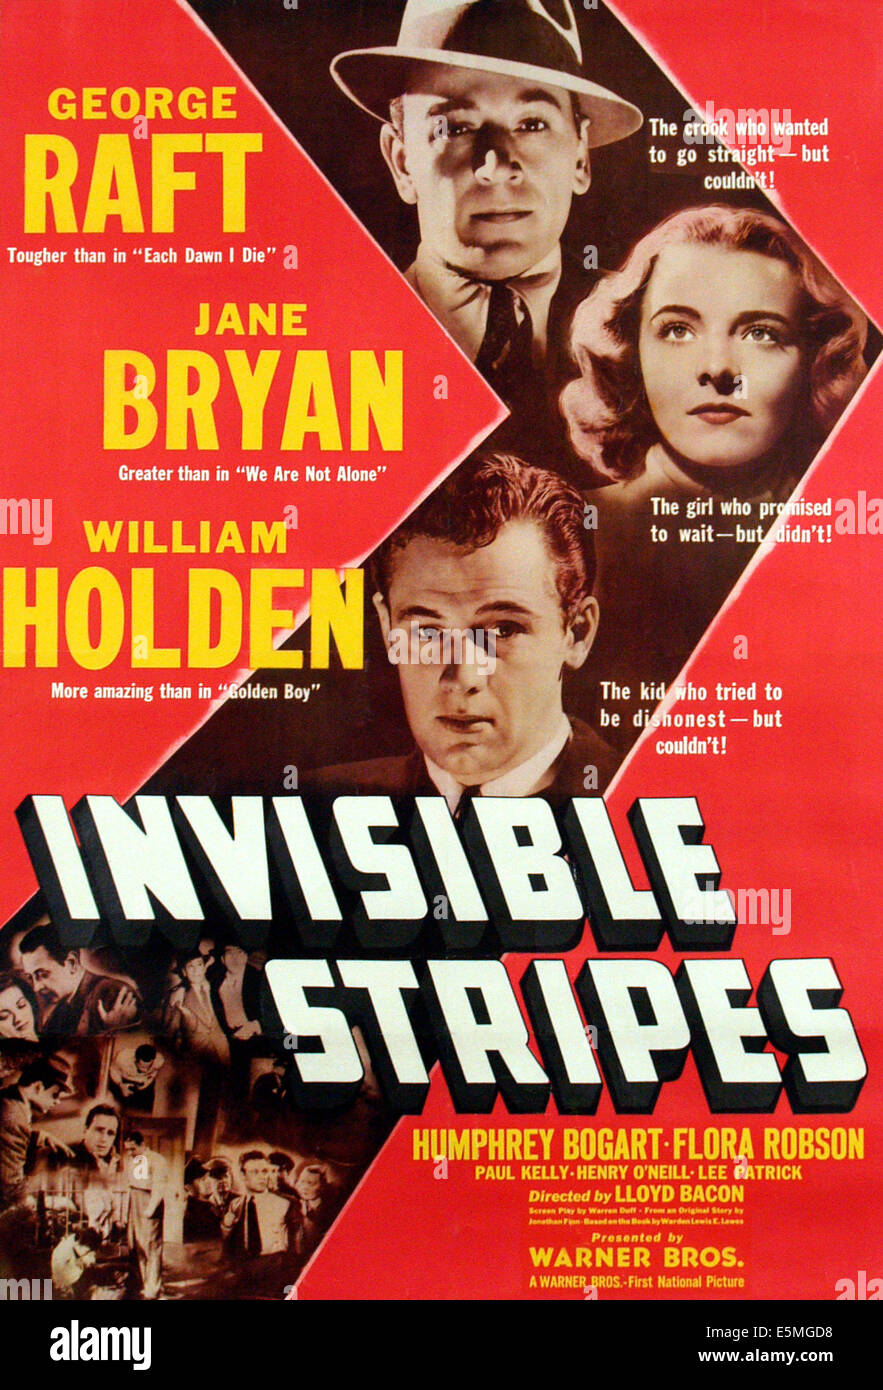 INVISIBLE STRIPES, upper half, from top: George Raft, Jane Bryan, William Holden on one-sheet poster art, 1939. Stock Photo